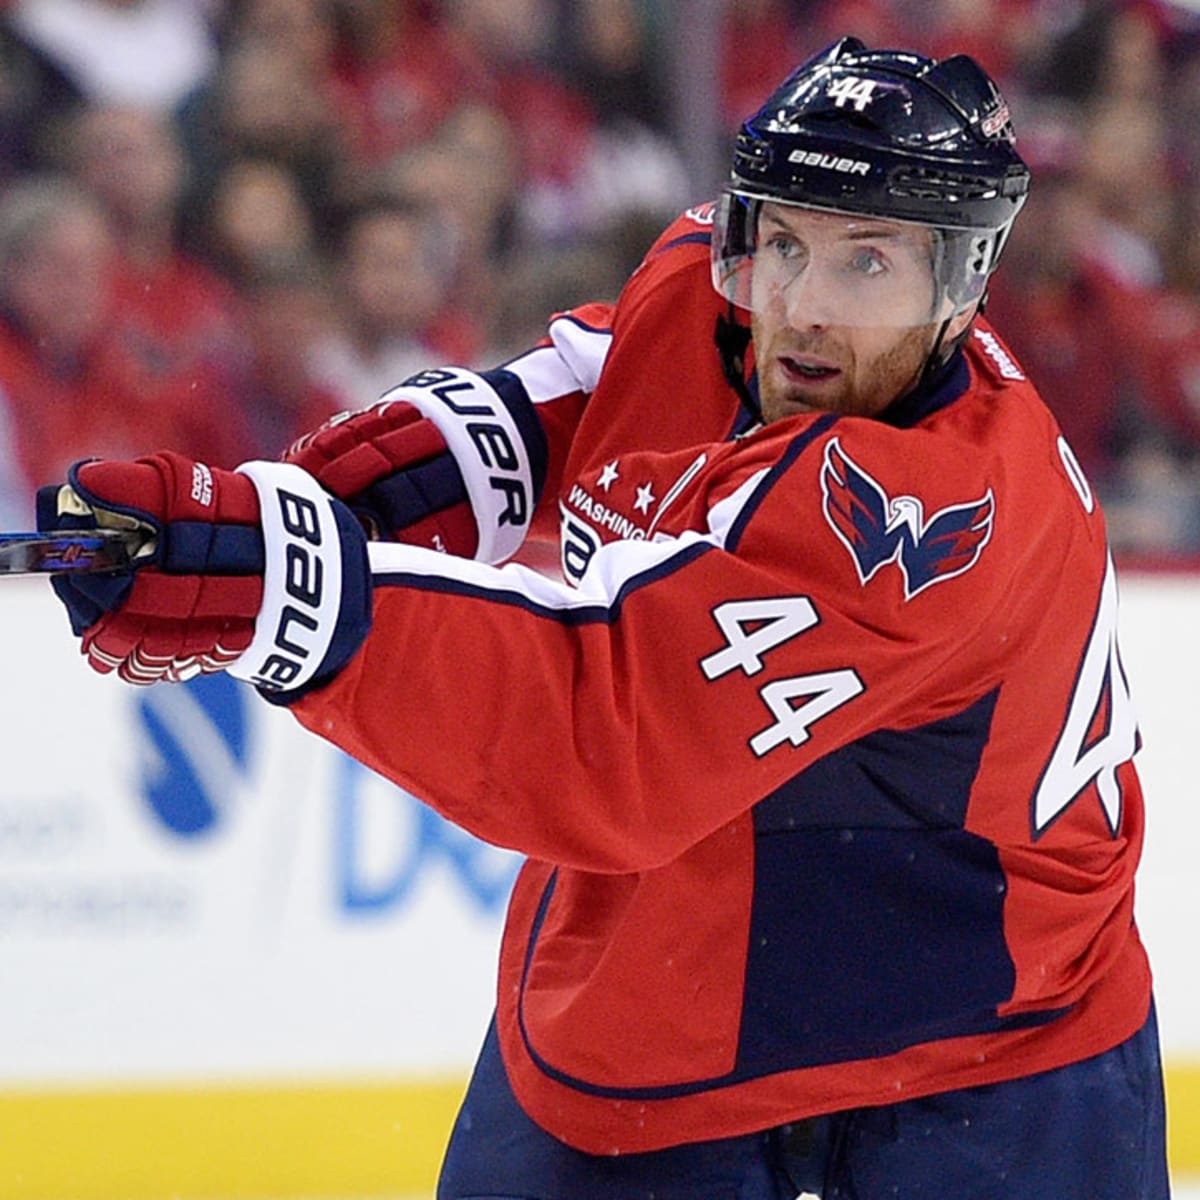 Will TJ Oshie at age 36 be better than Justin Williams at age 36?